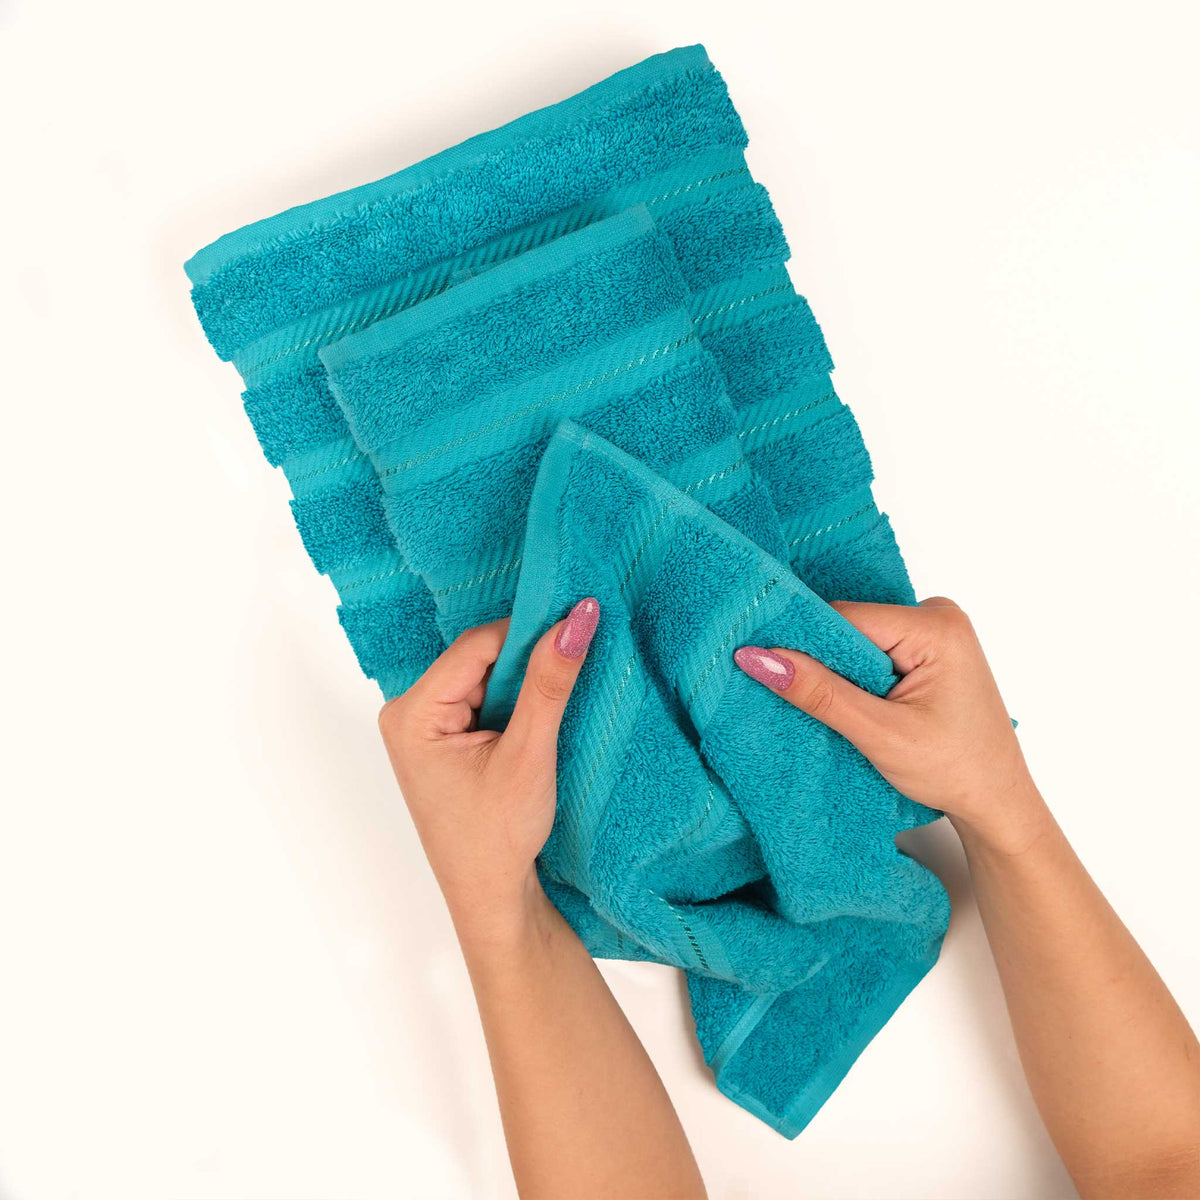 Towel colors to avoid in bathrooms: and what to buy instead